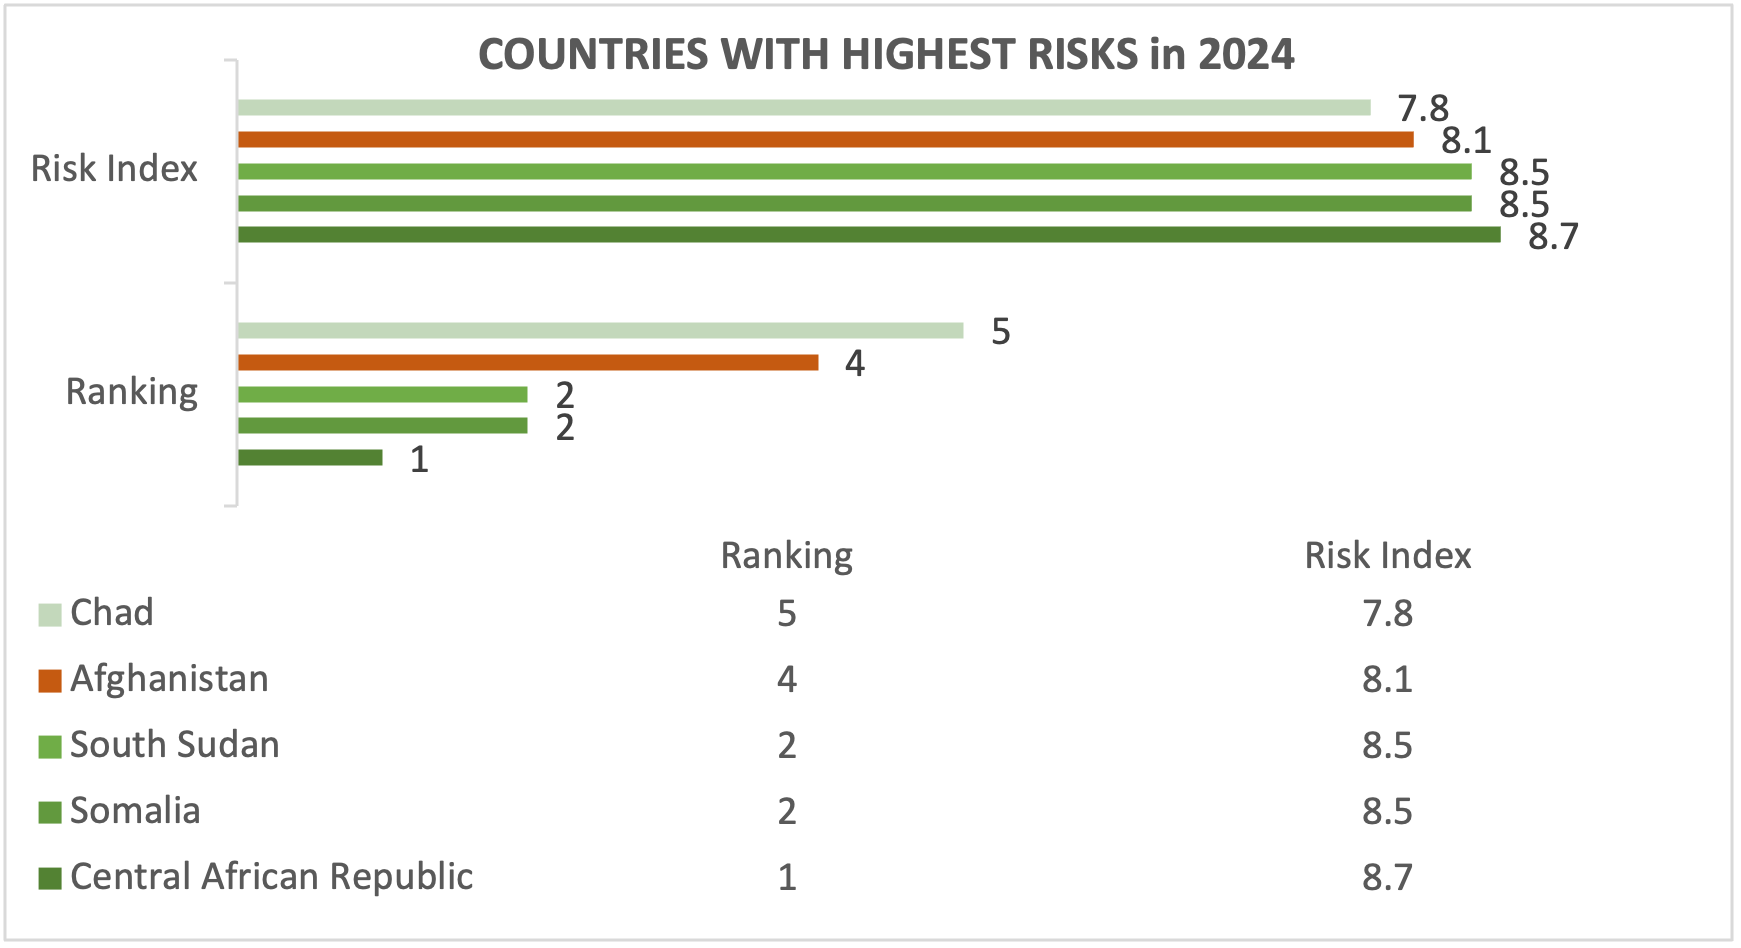 Figure 1: Most At-Risk Countries in 2024 (Inform Risk Index data, author’s visualization)